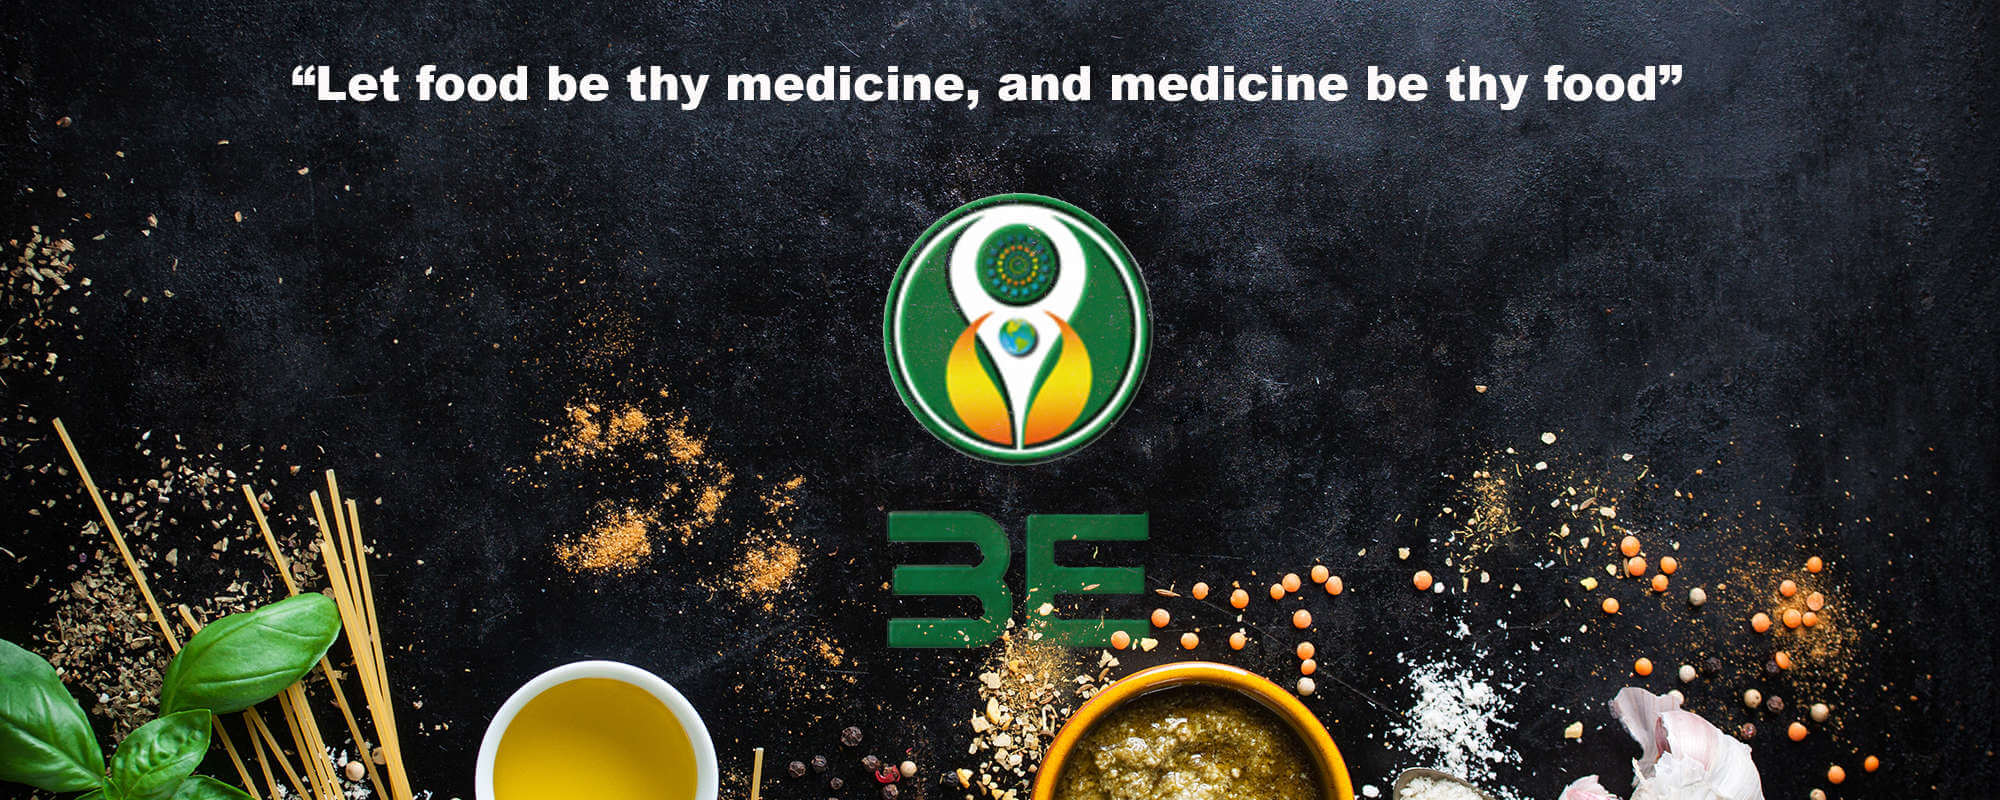 Let food be thy medicine, and medicine by thy food